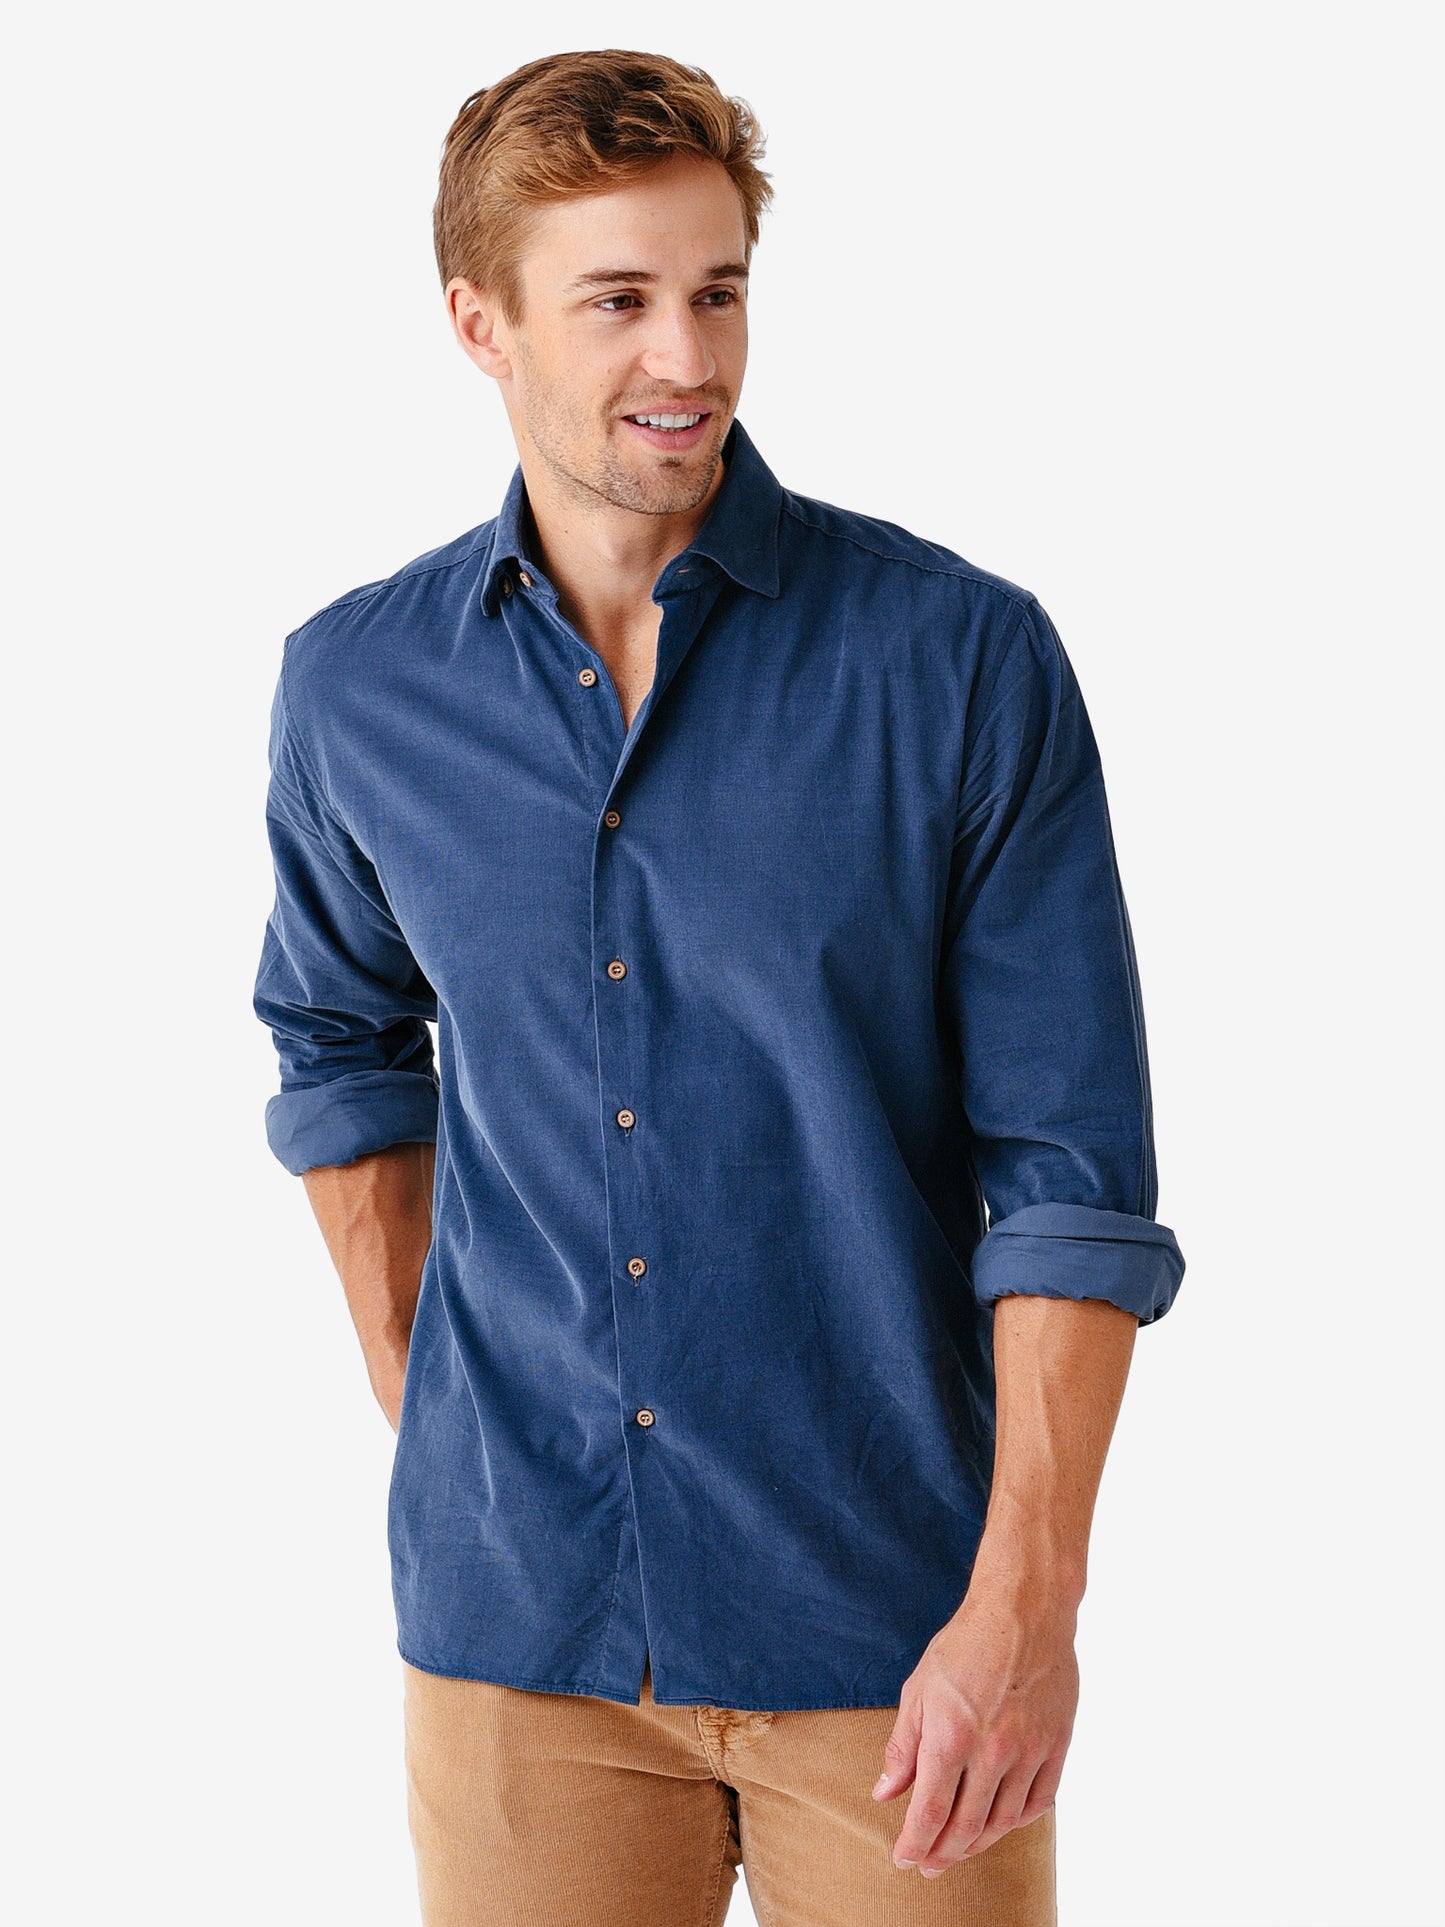 Miller Westby Men's Thad Button-Down Shirt